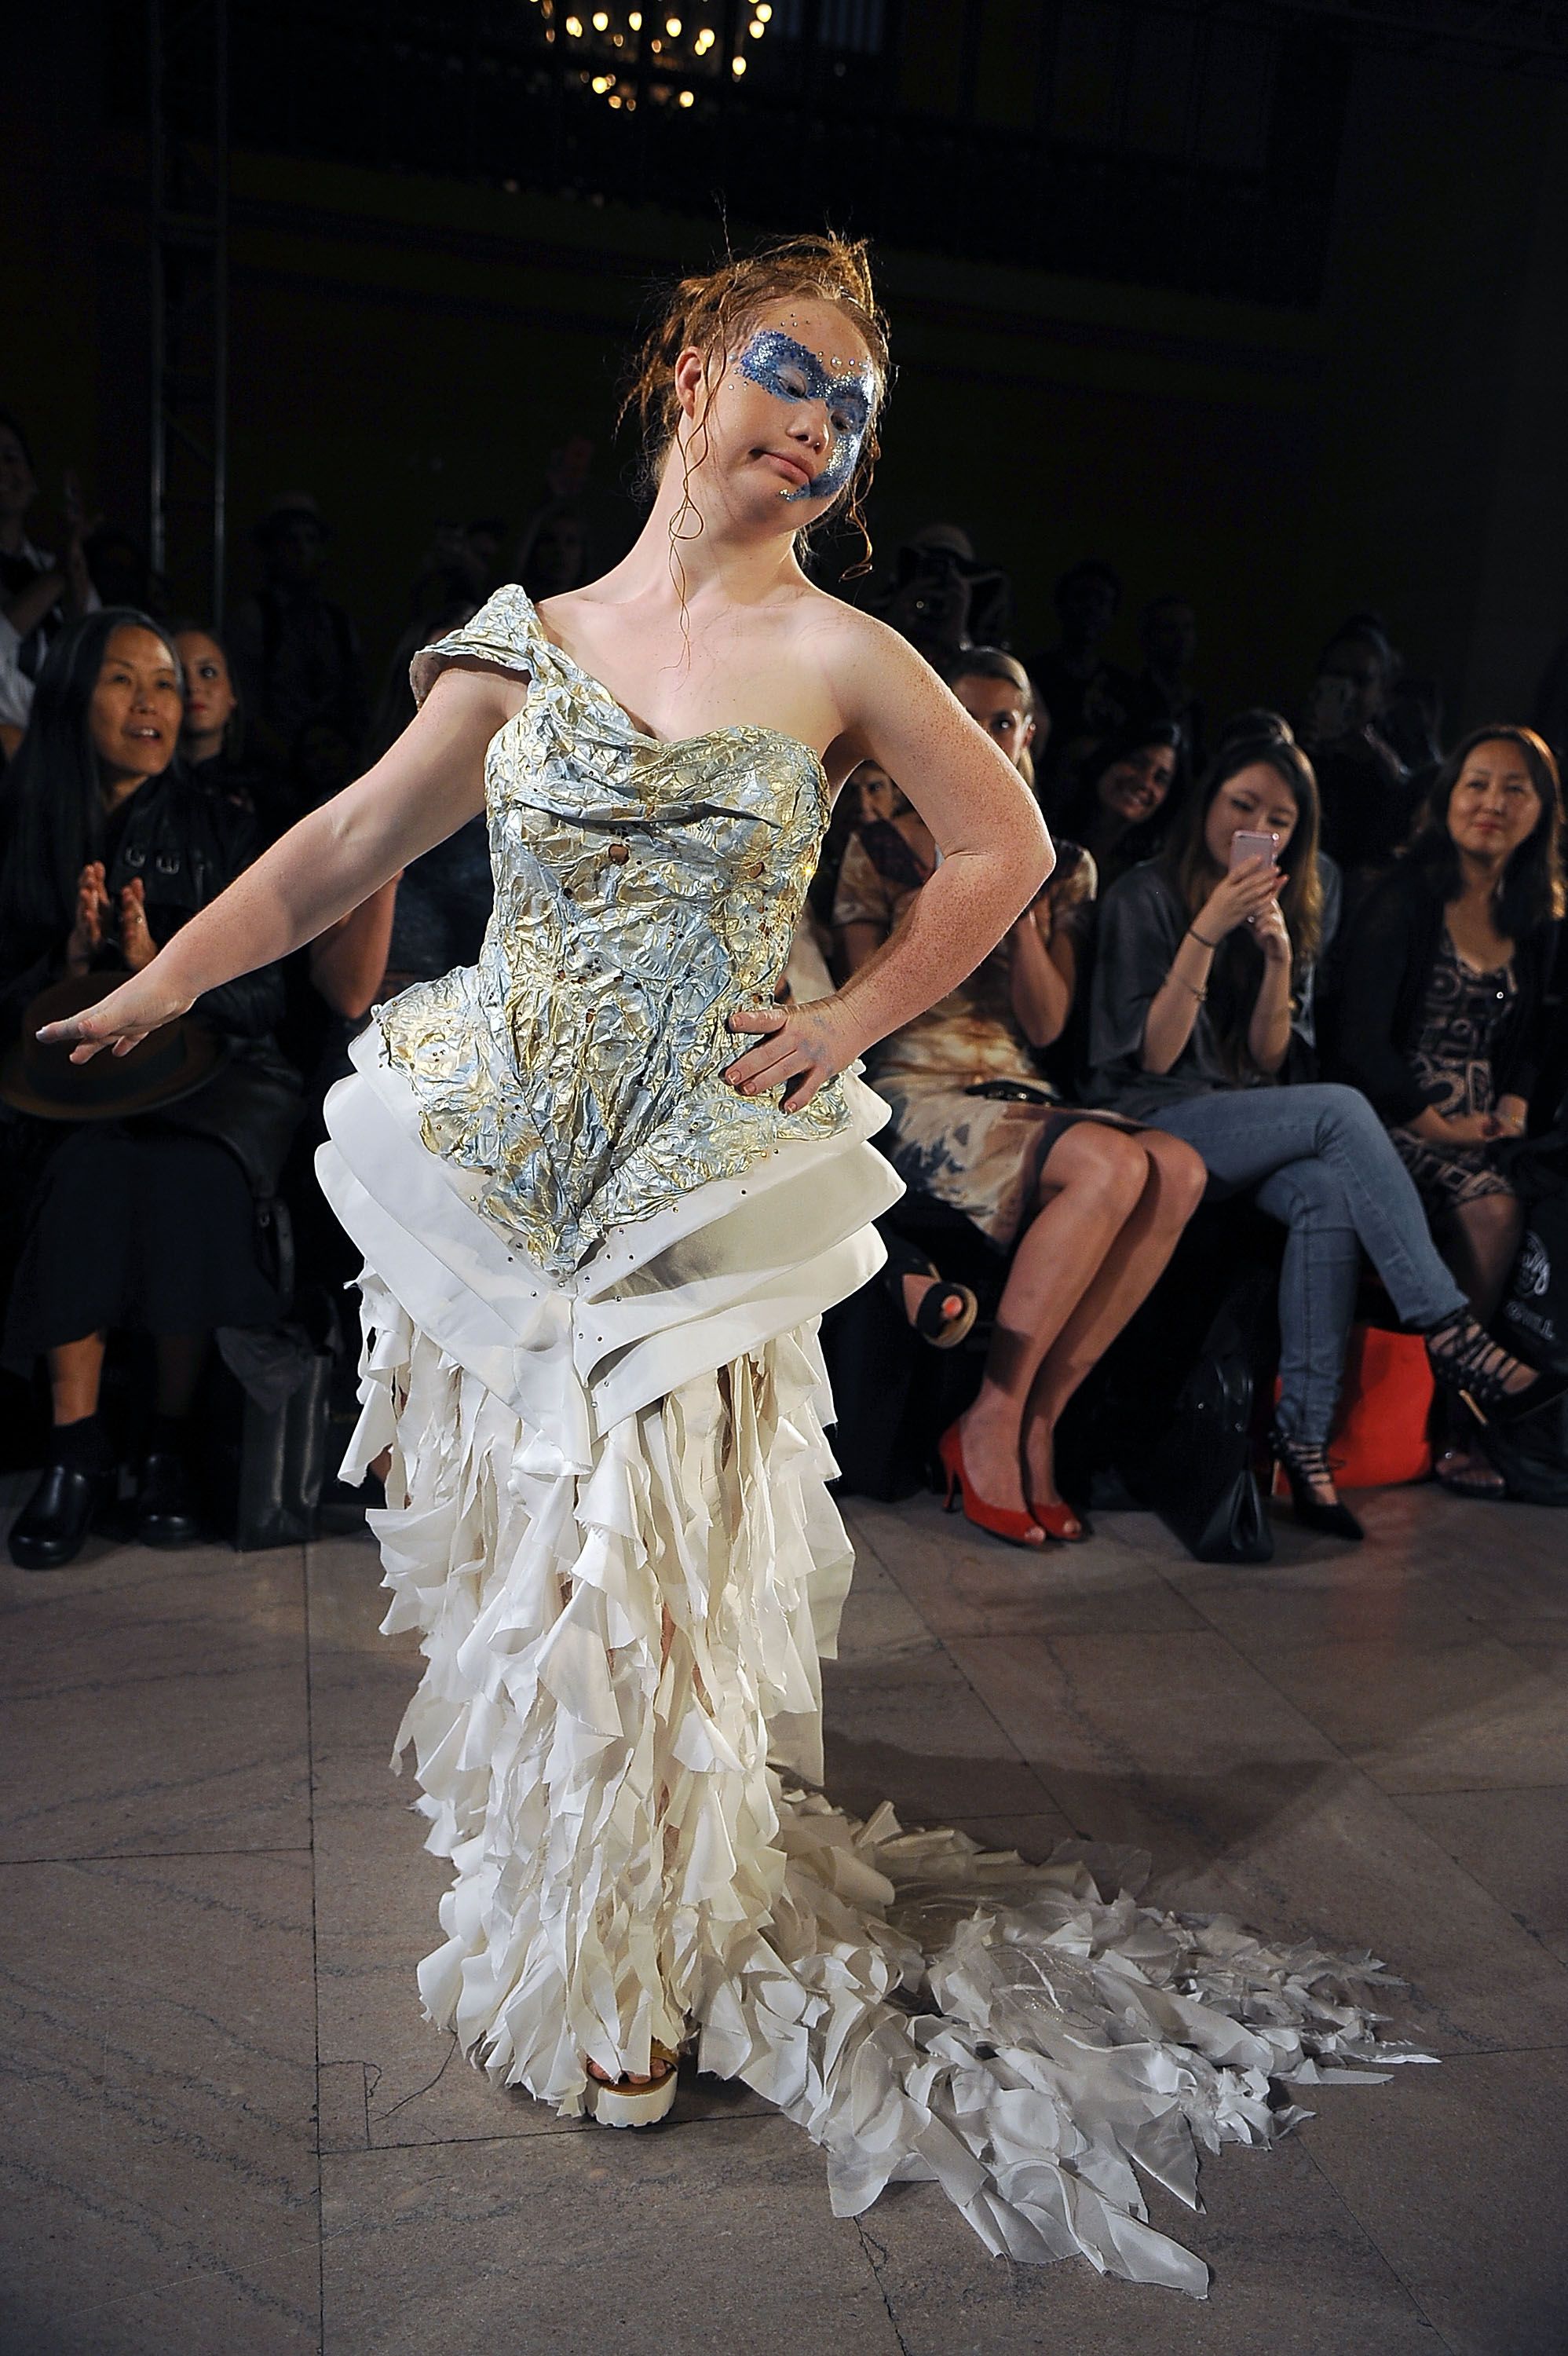 fusionere Blossom Imponerende 18-Year-Old Model With Down Syndrome Plans to Continue Crushing Catwalks